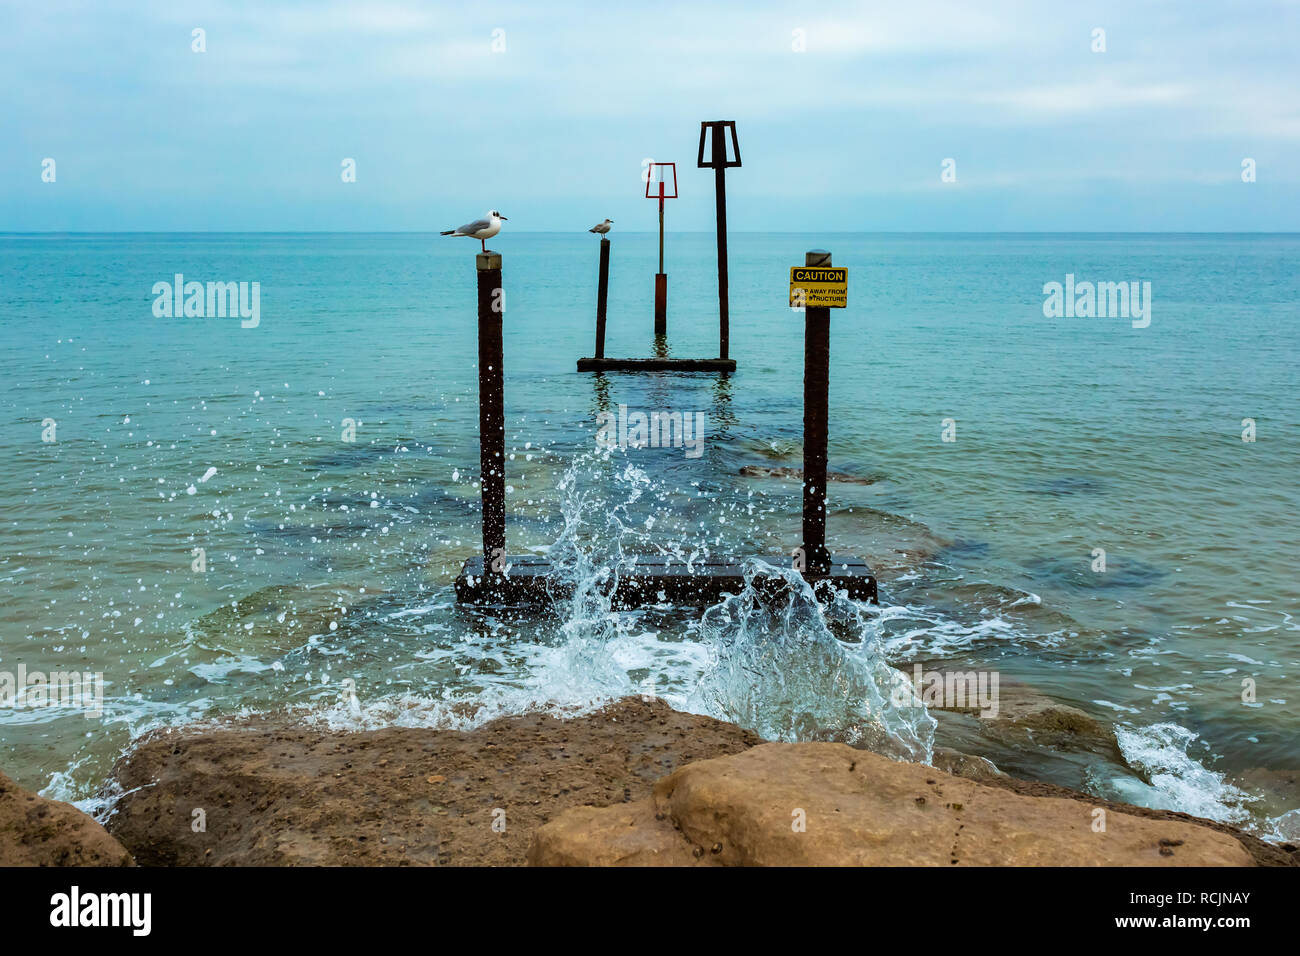 Landscape photograph taken from end of beach groyne at Sandbanks, Poole, of warning markers on submerged structure. Stock Photo